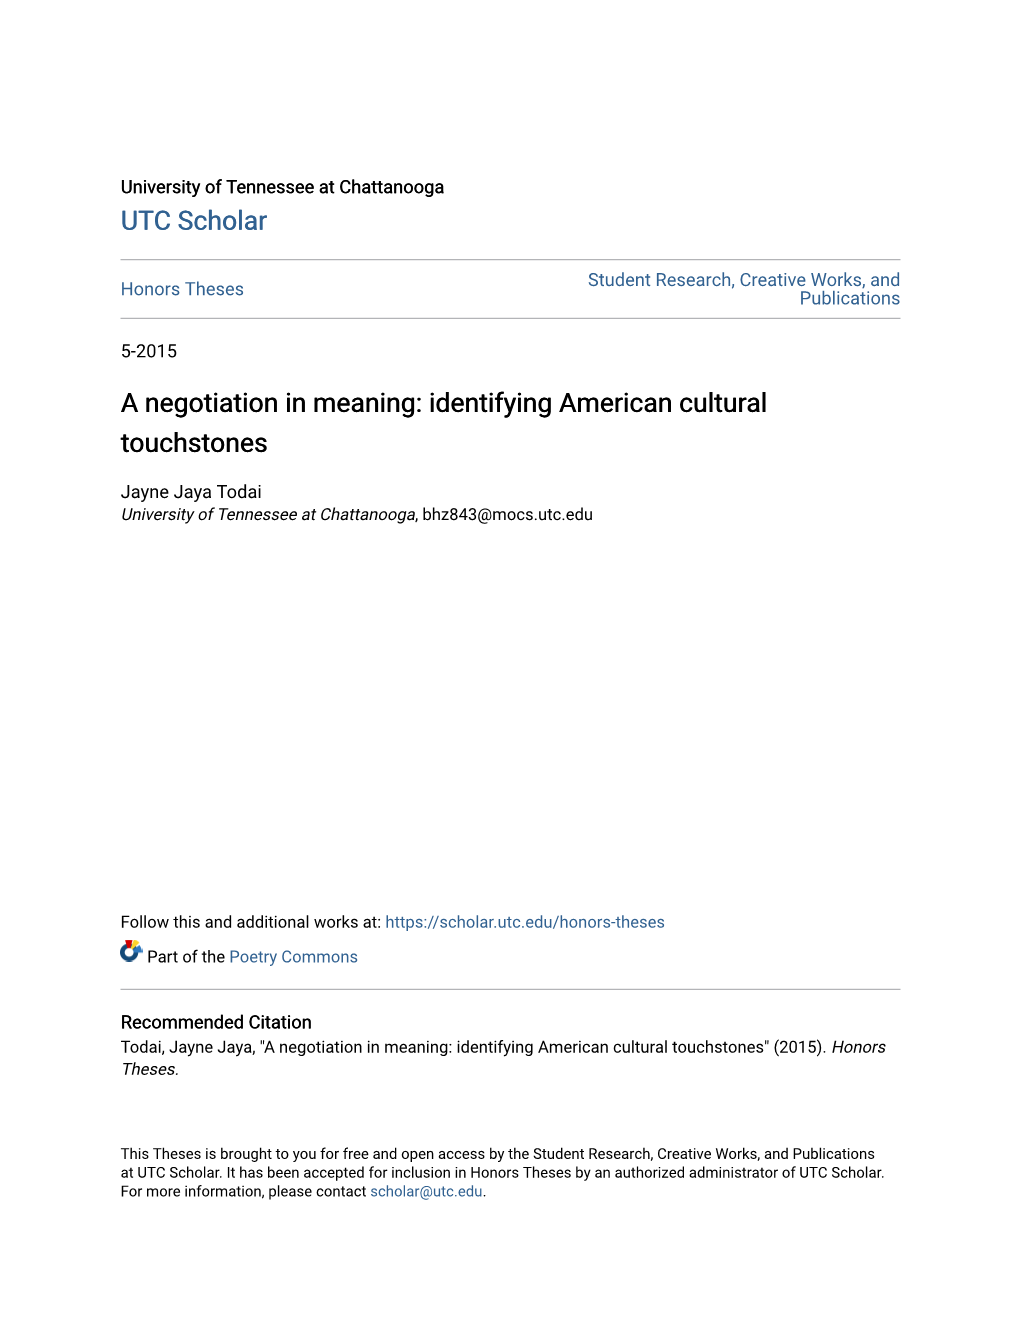 A Negotiation in Meaning: Identifying American Cultural Touchstones